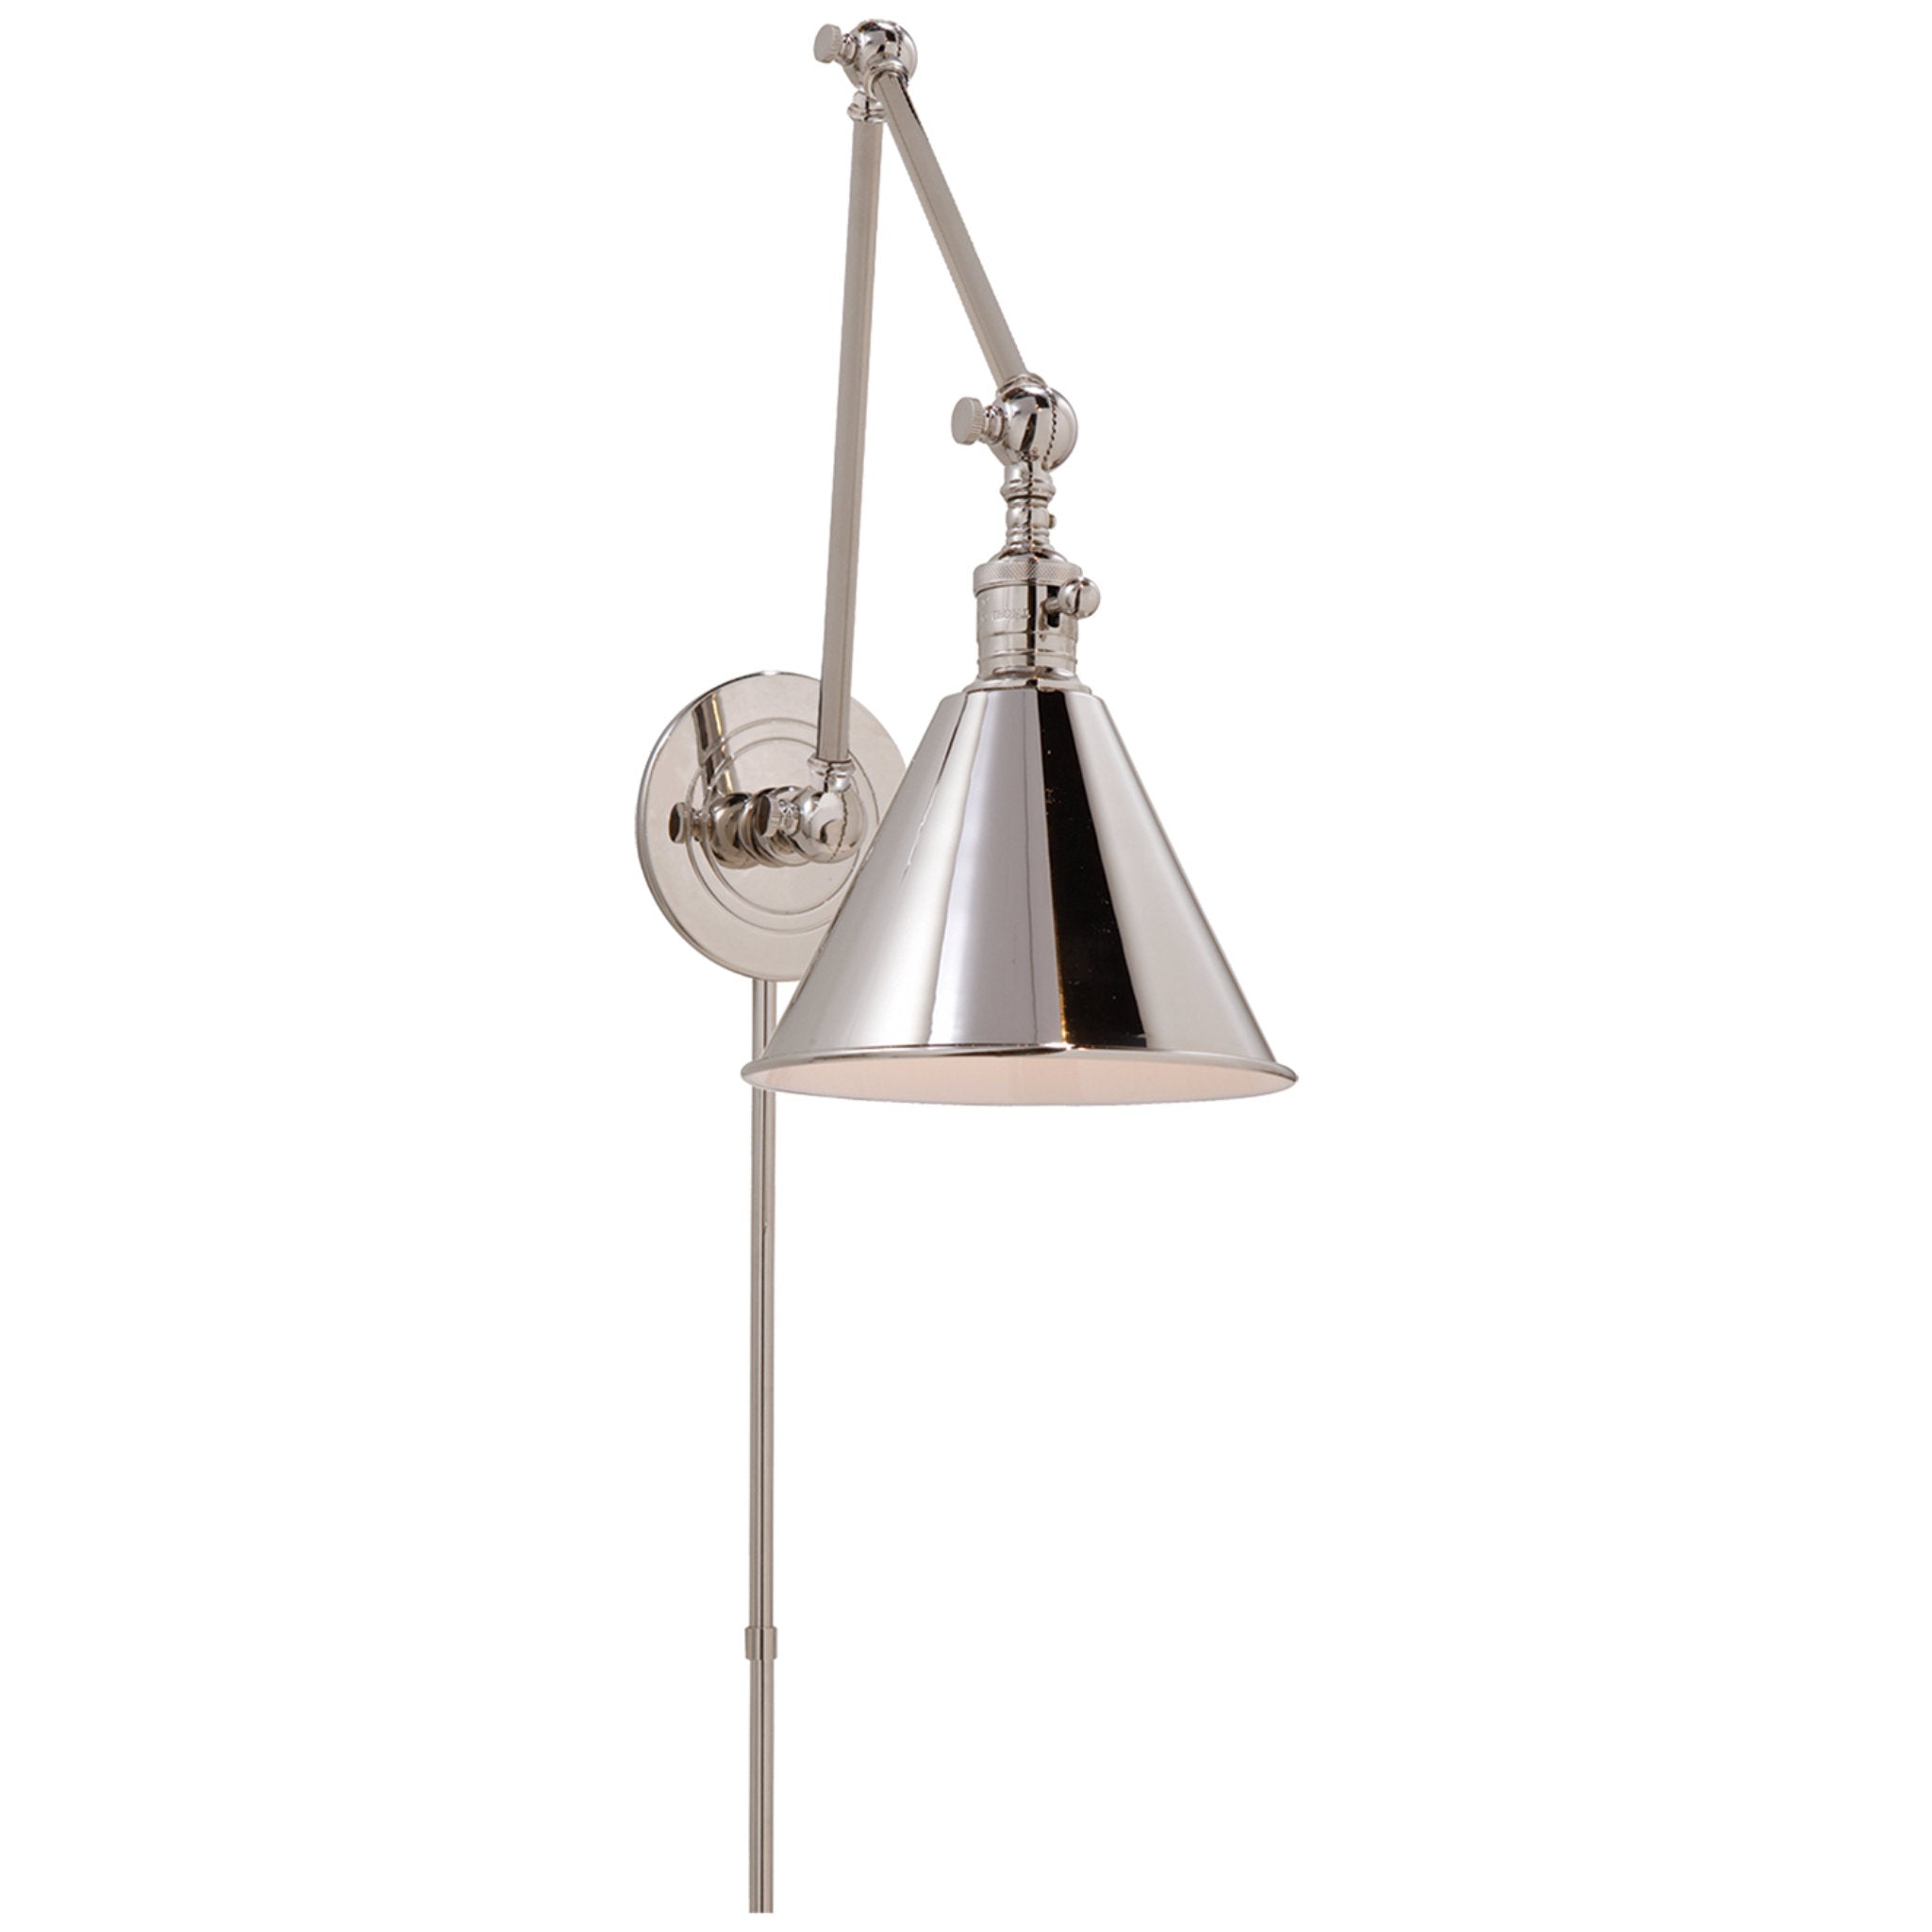 Chapman & Myers Boston Functional Double Arm Library Light in Polished Nickel